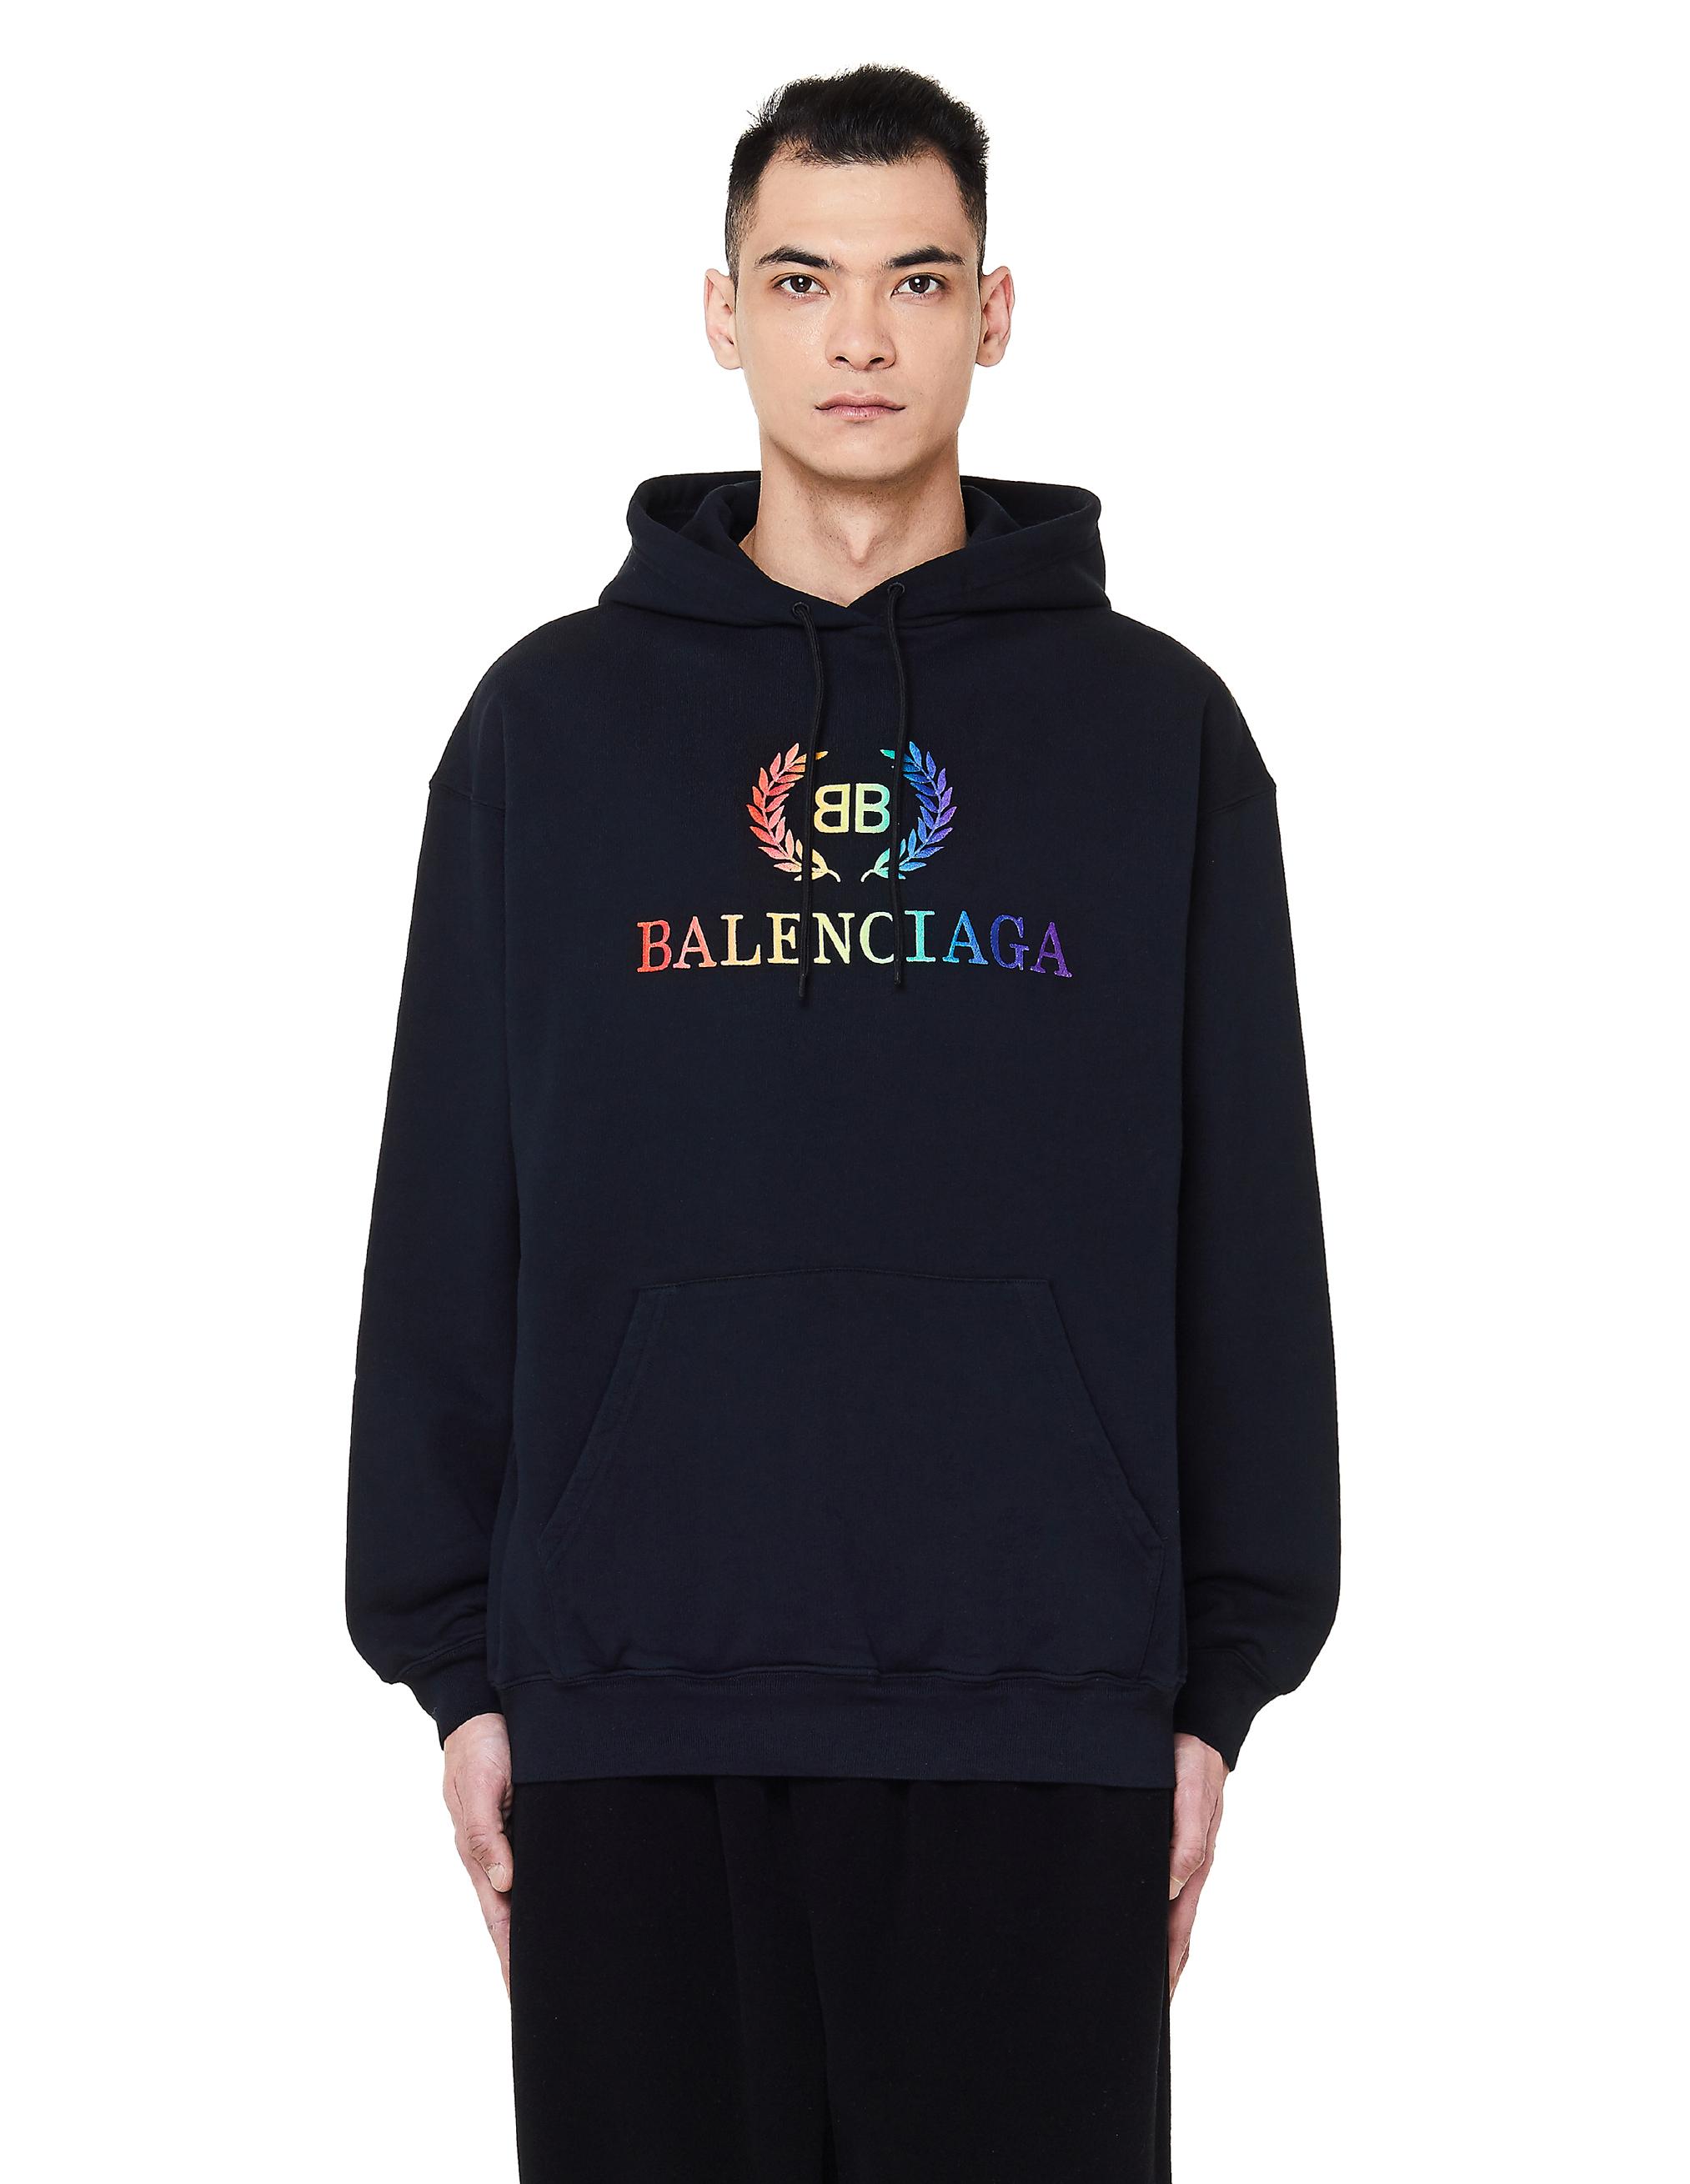 Balenciaga Embroidered Logo Hoodie in Black for Men - Lyst